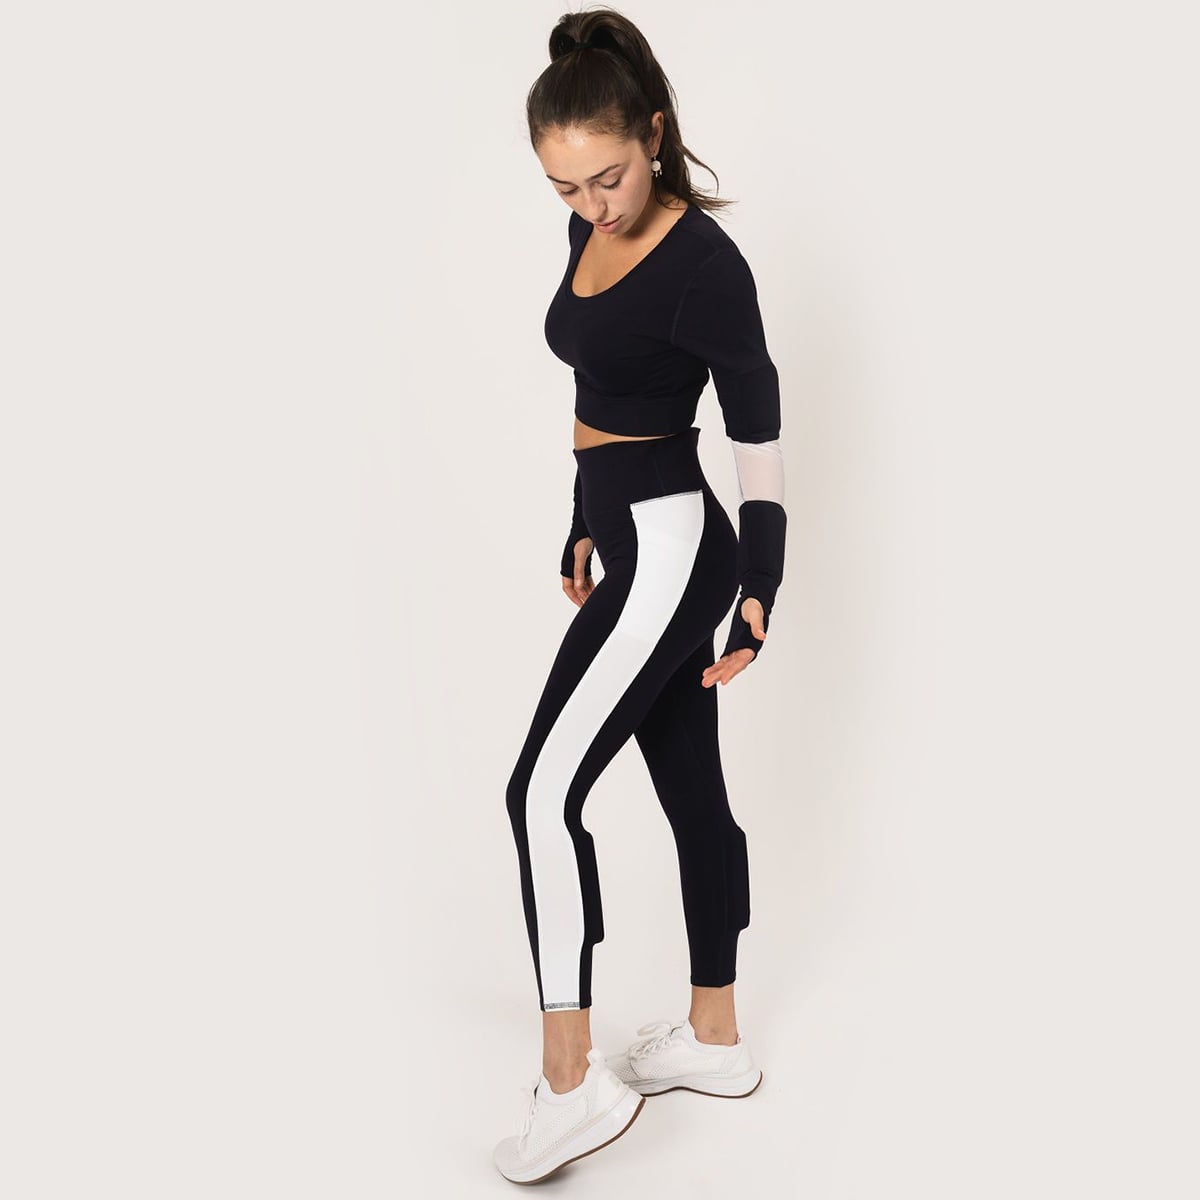 Model wearing the long sleeve scoop neck weighted shrug in navy with white accents and the weighted navy with white strip down the leg booty lift legging with weights on the calves.